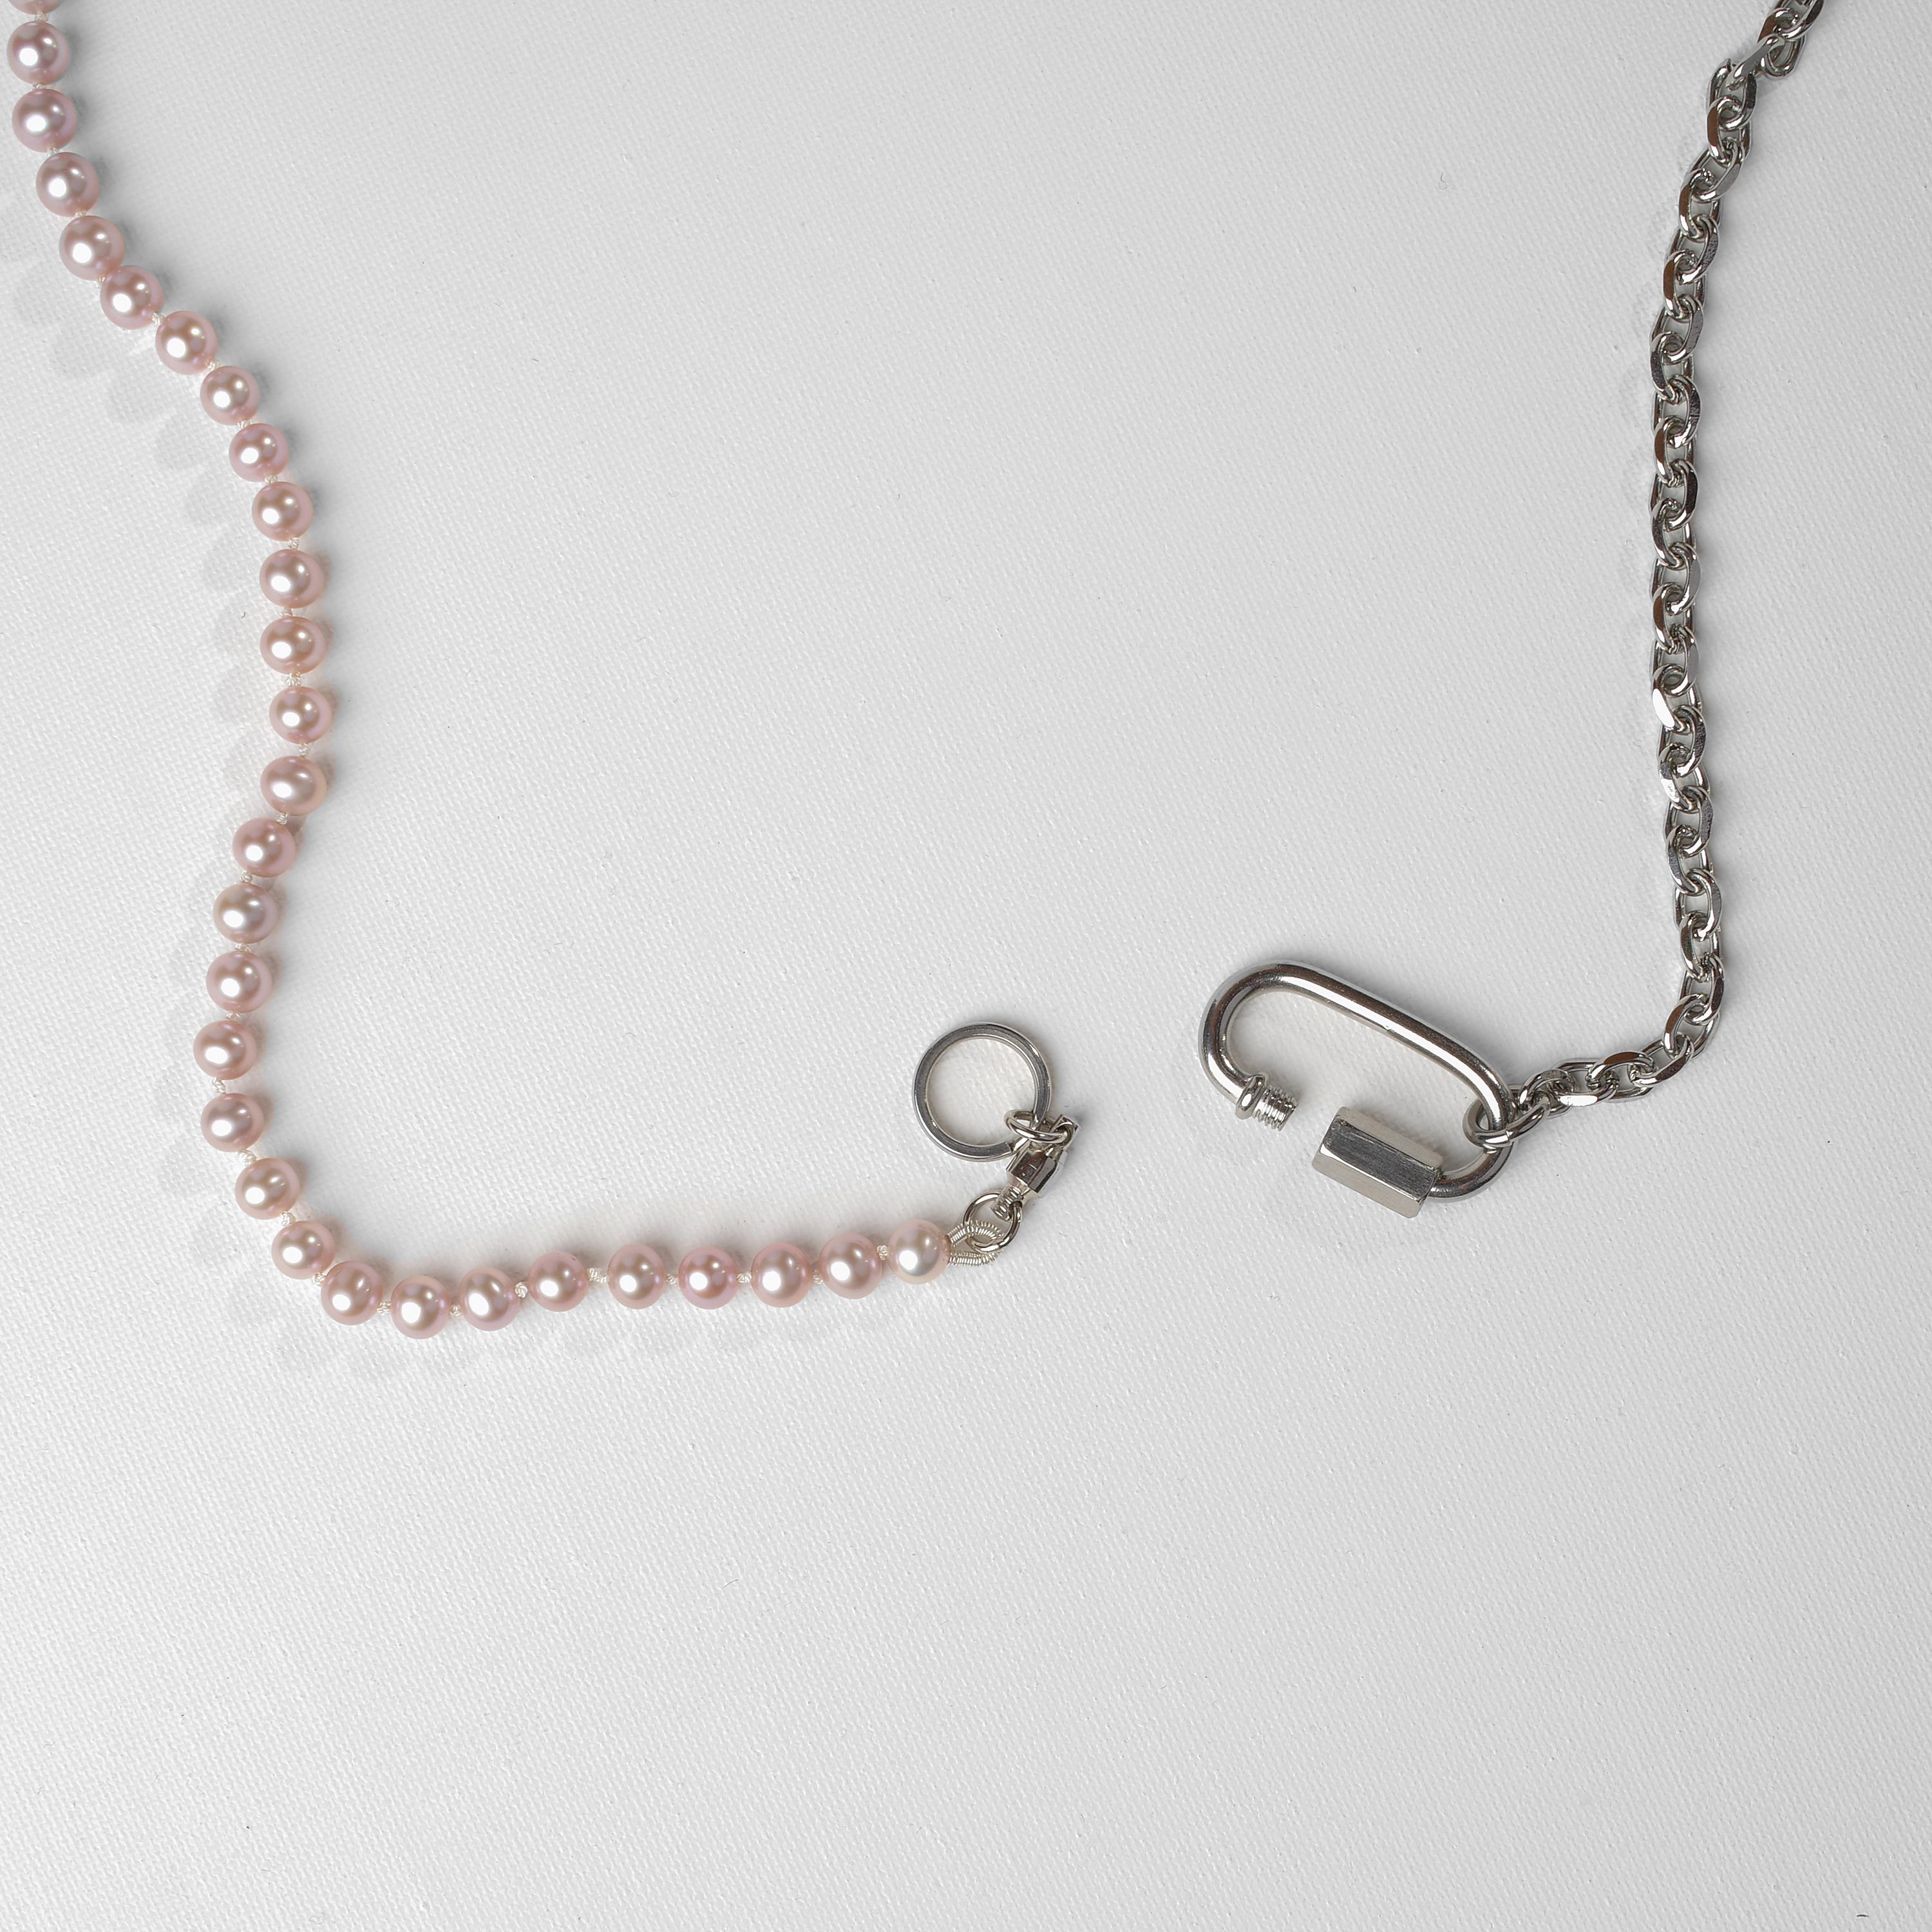 Women's or Men's Pearl and Stainless Steel Necklace For Sale